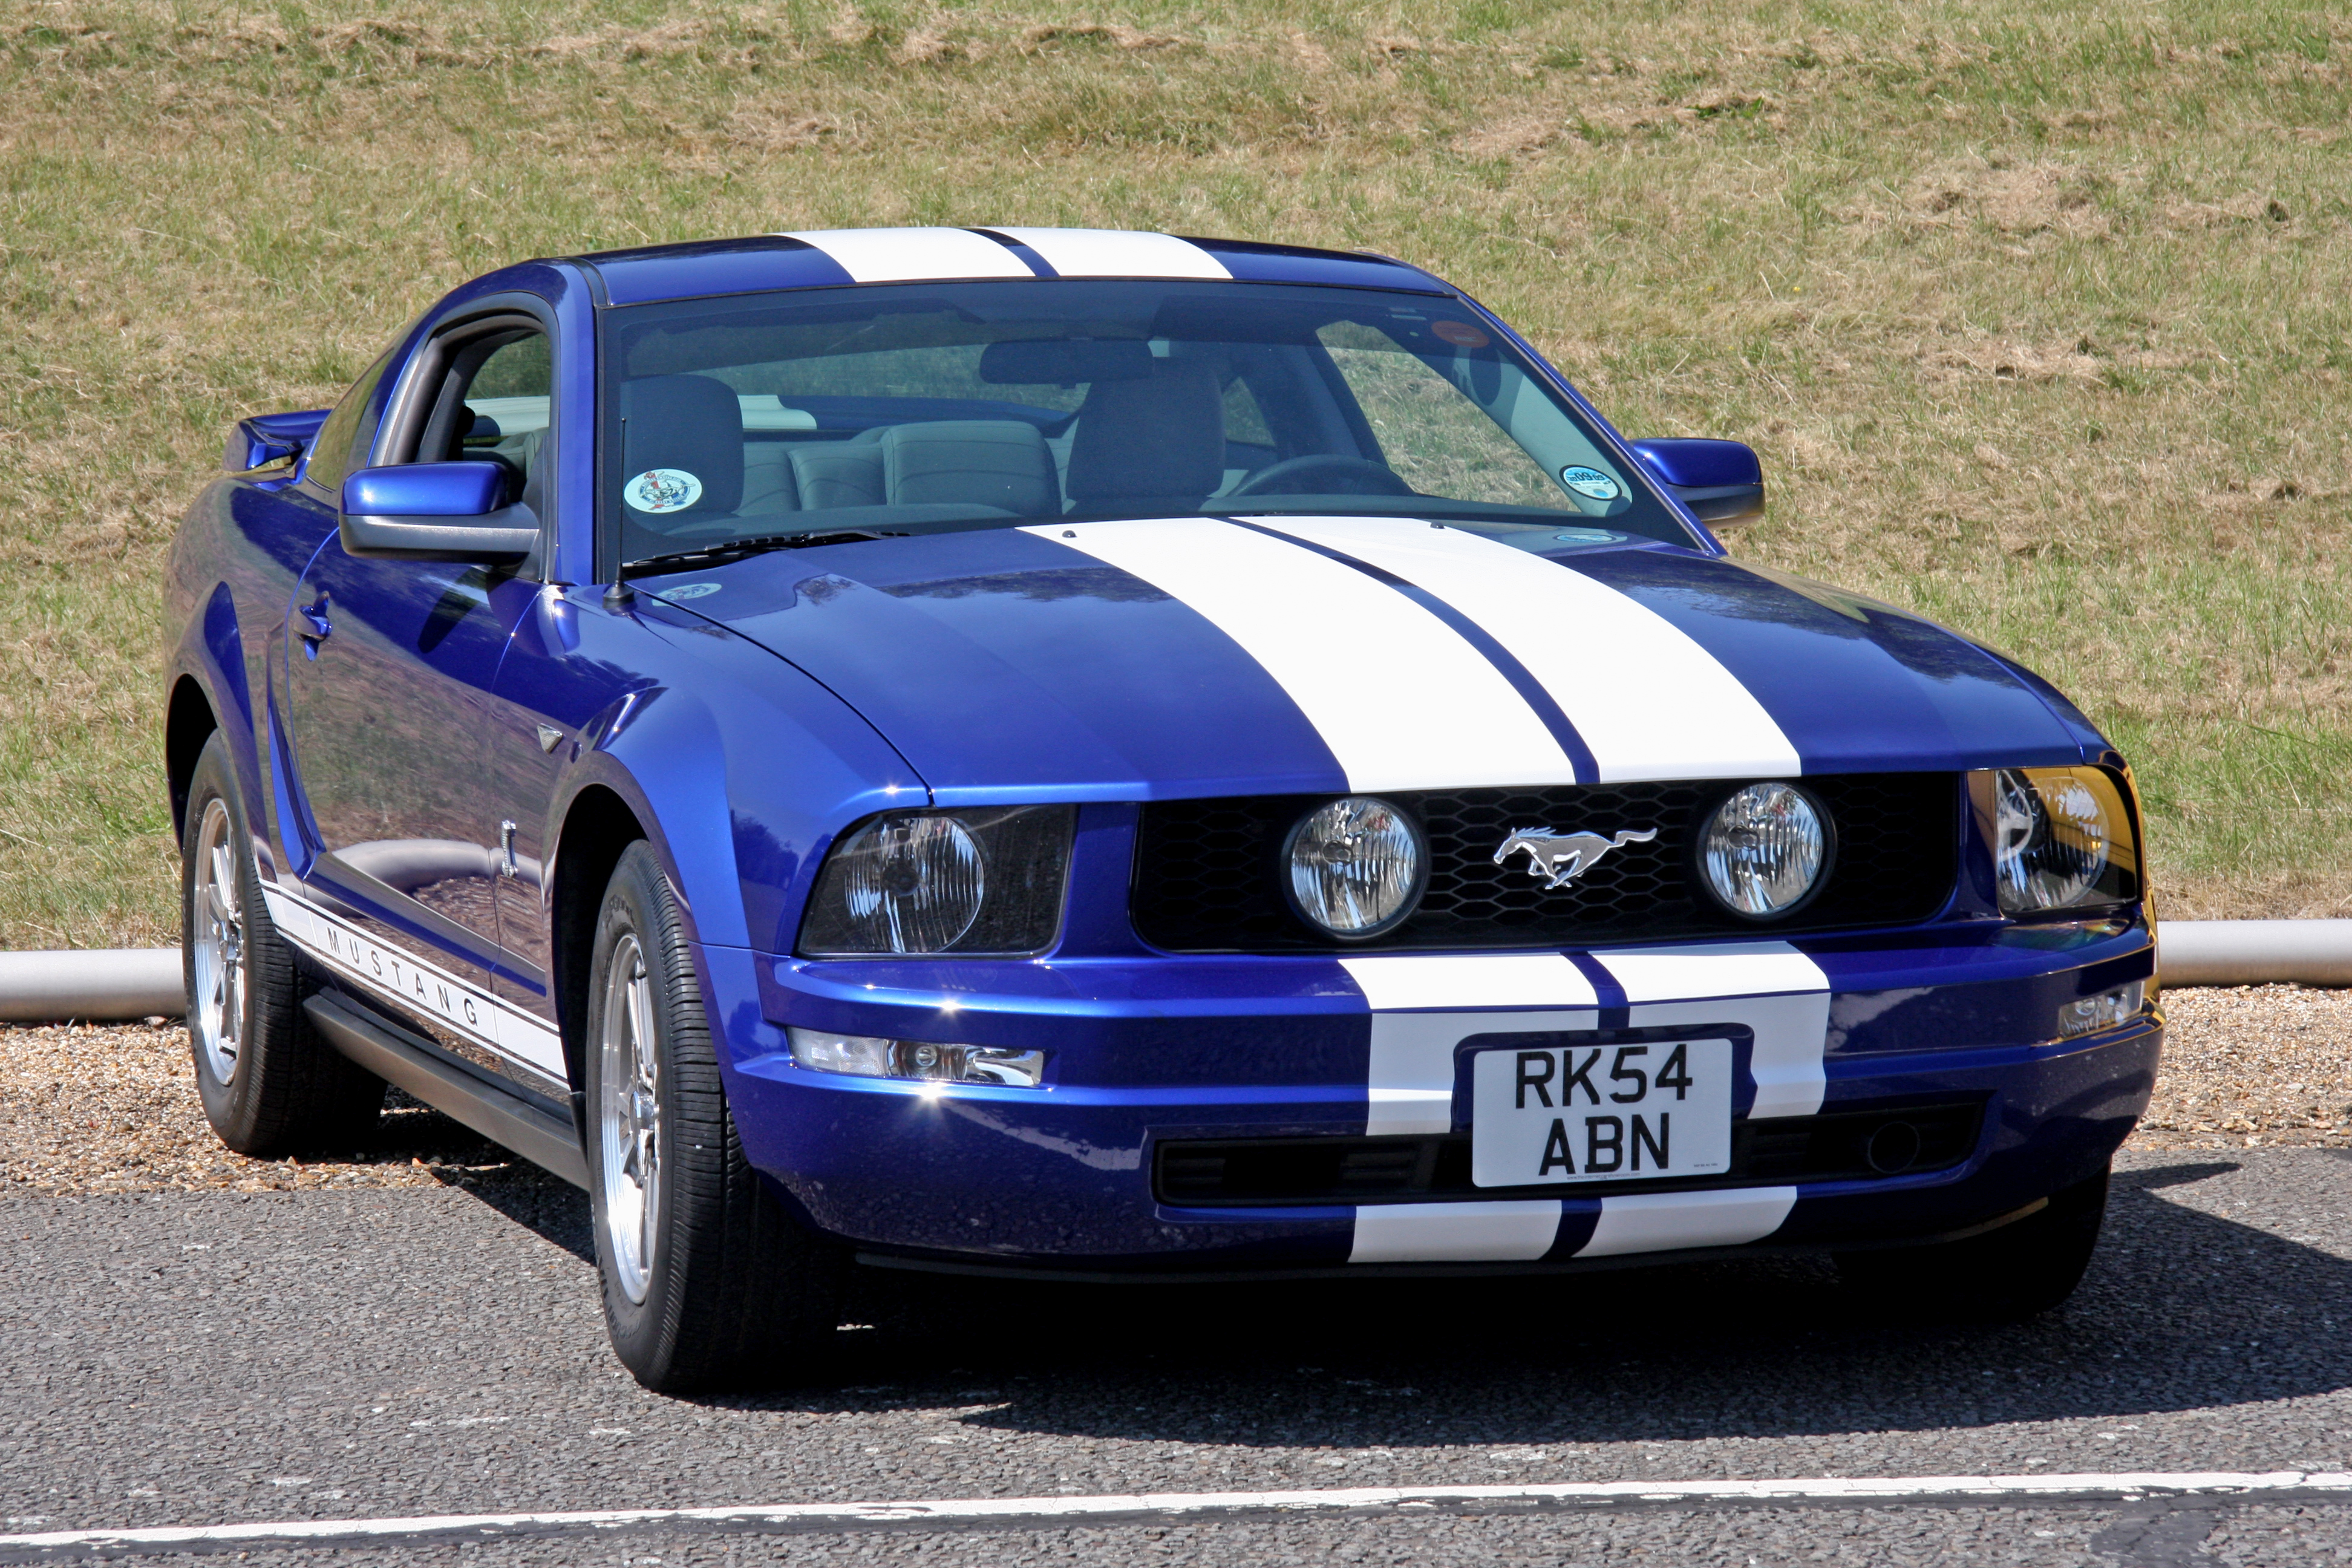 FileFord Mustang Flickr exfordy.jpg Wikimedia Commons